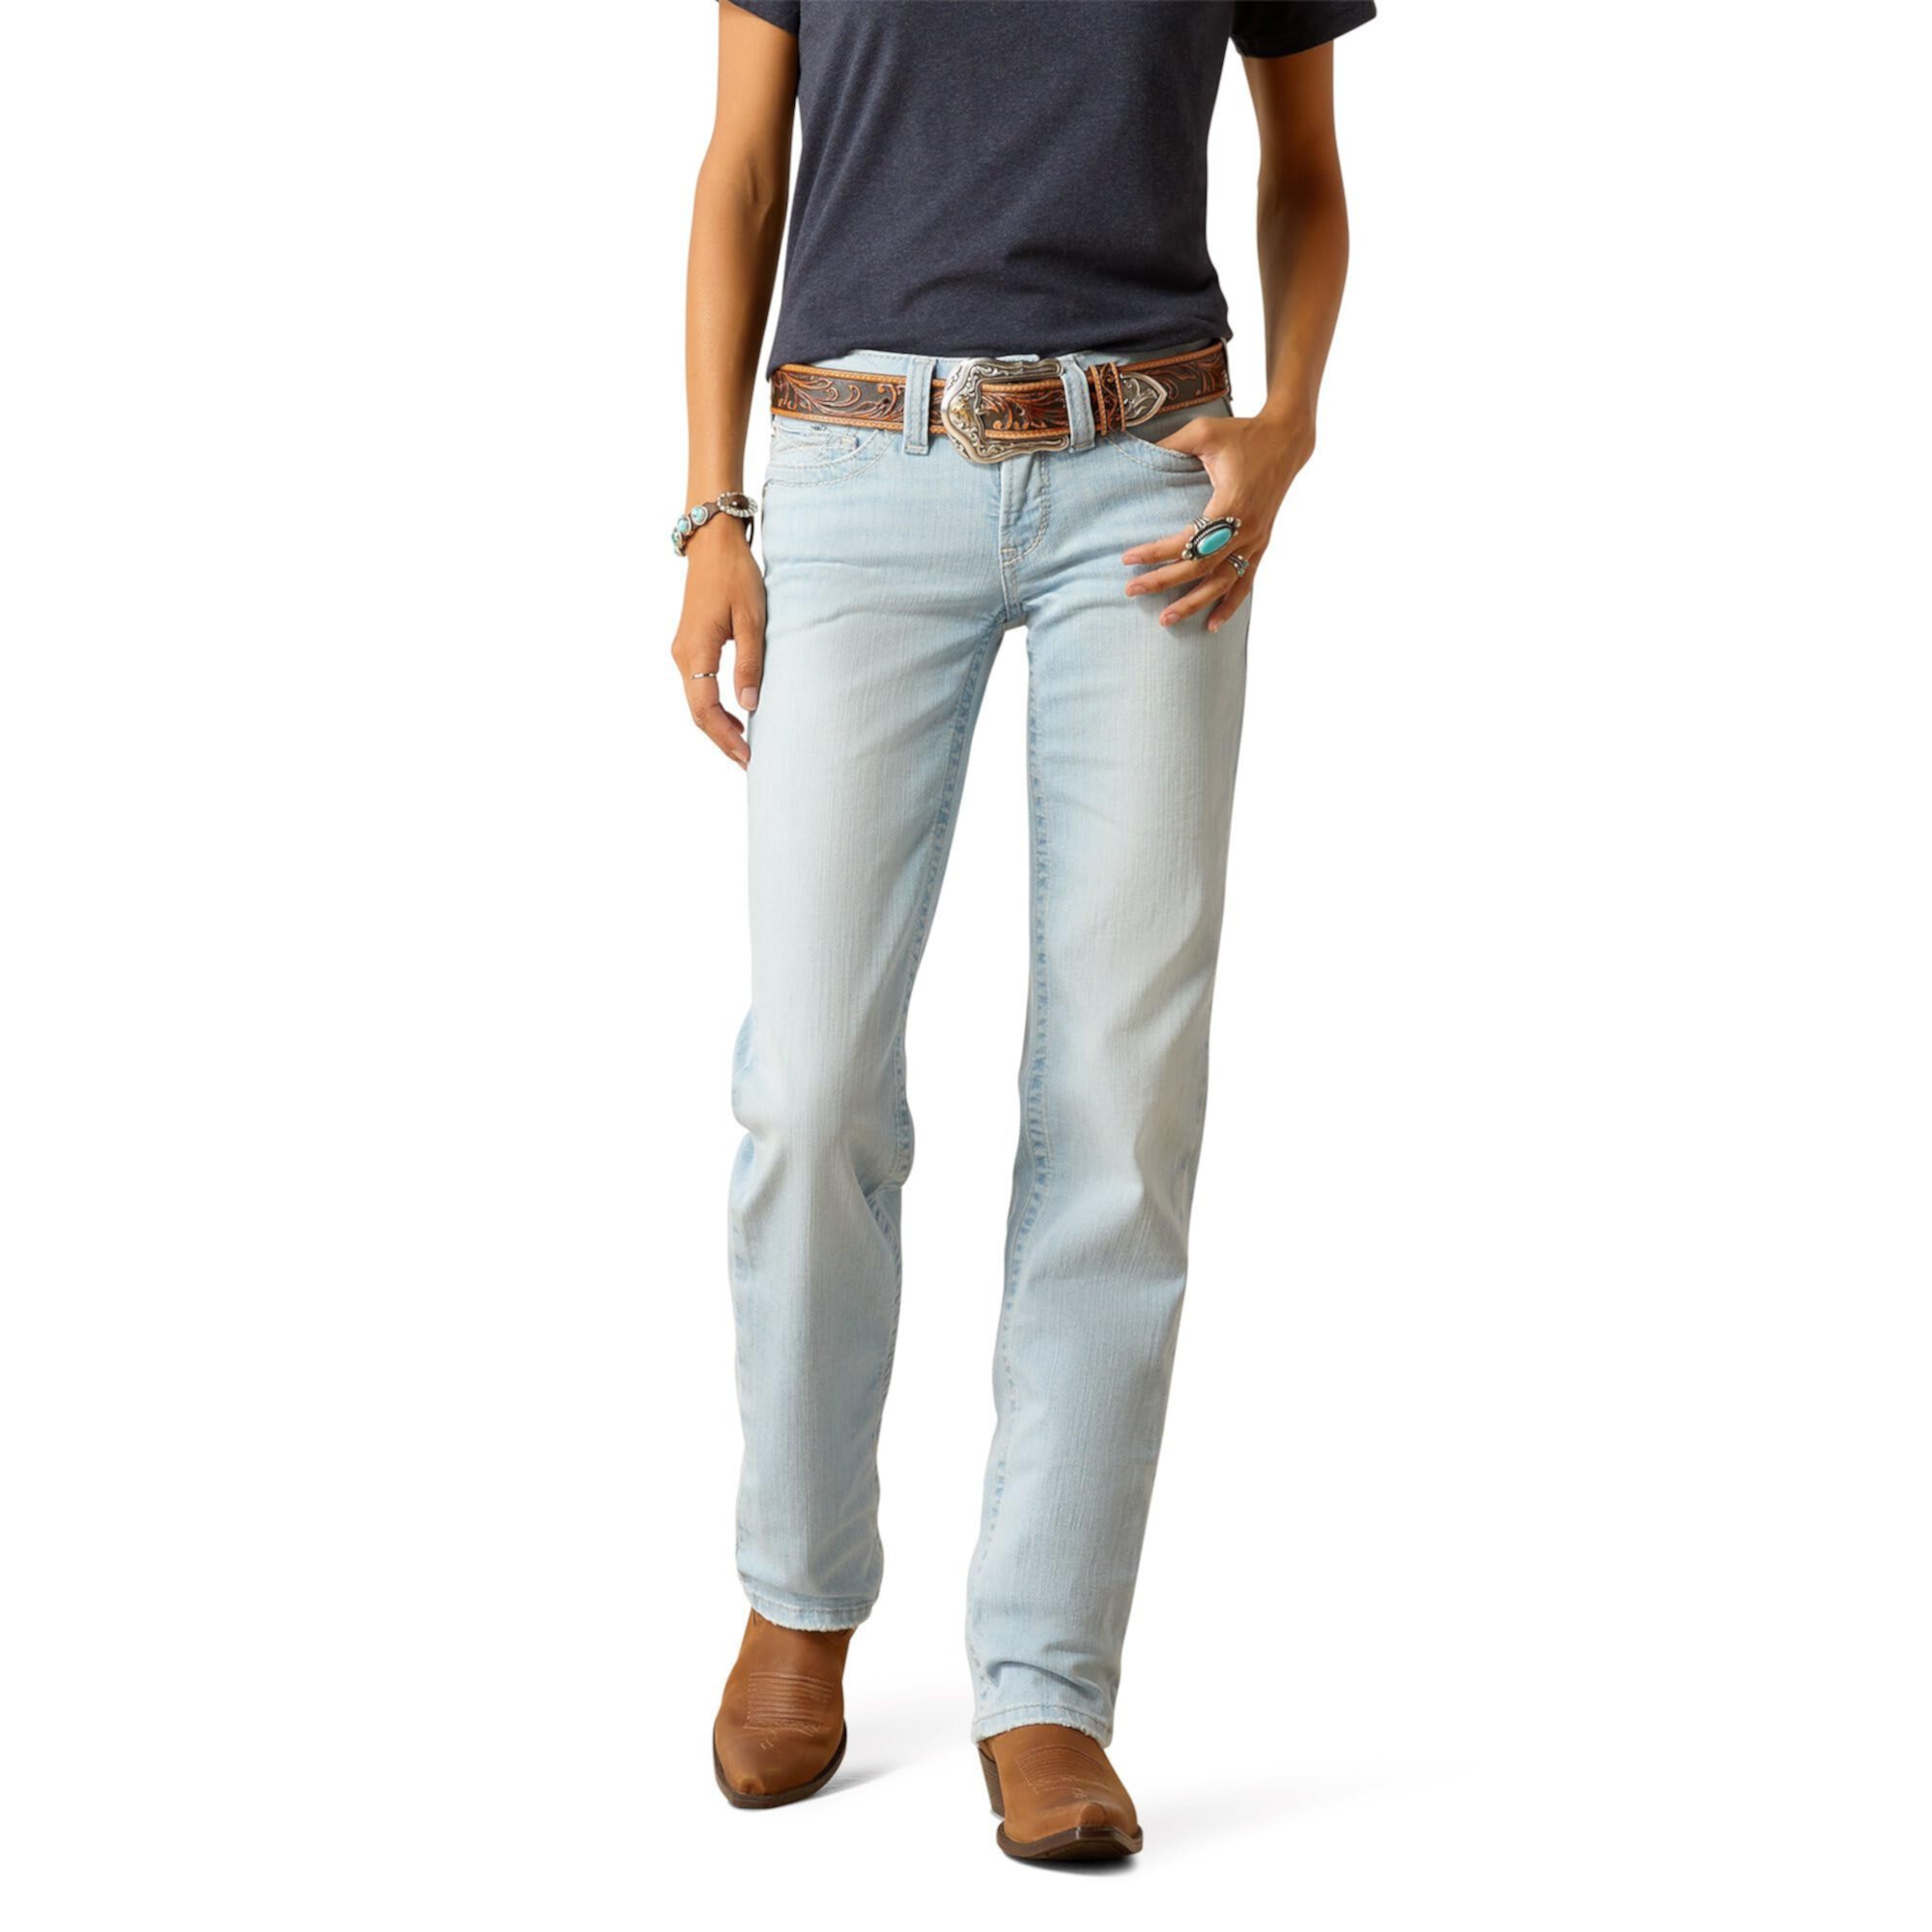 Low-Rise Zayla Straight Jeans in Claremont Ariat